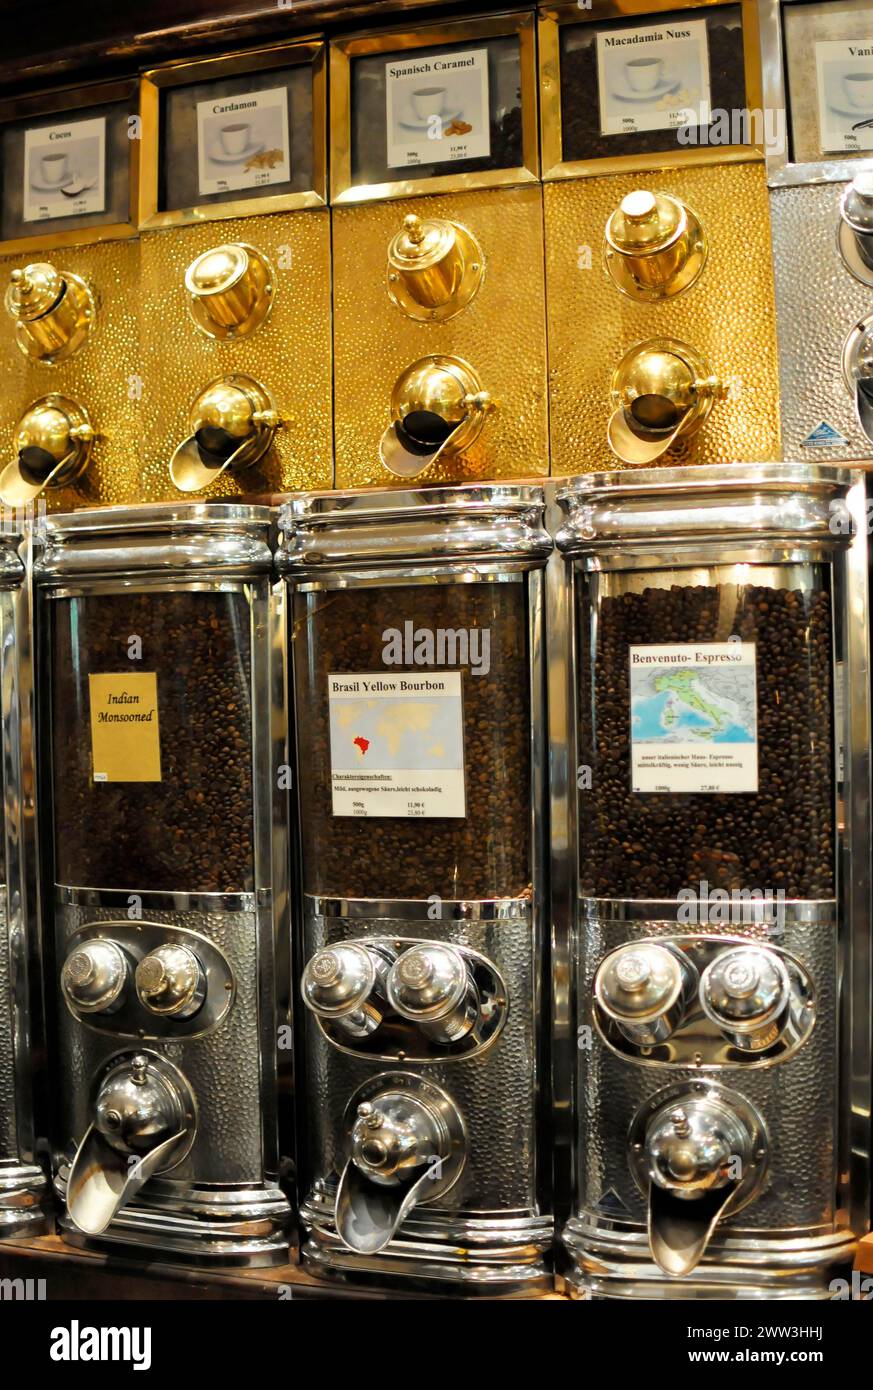 Coffee, series of coffee dispensers with different types of beans and labels, Hamburg, Hanseatic City of Hamburg, Germany Stock Photo